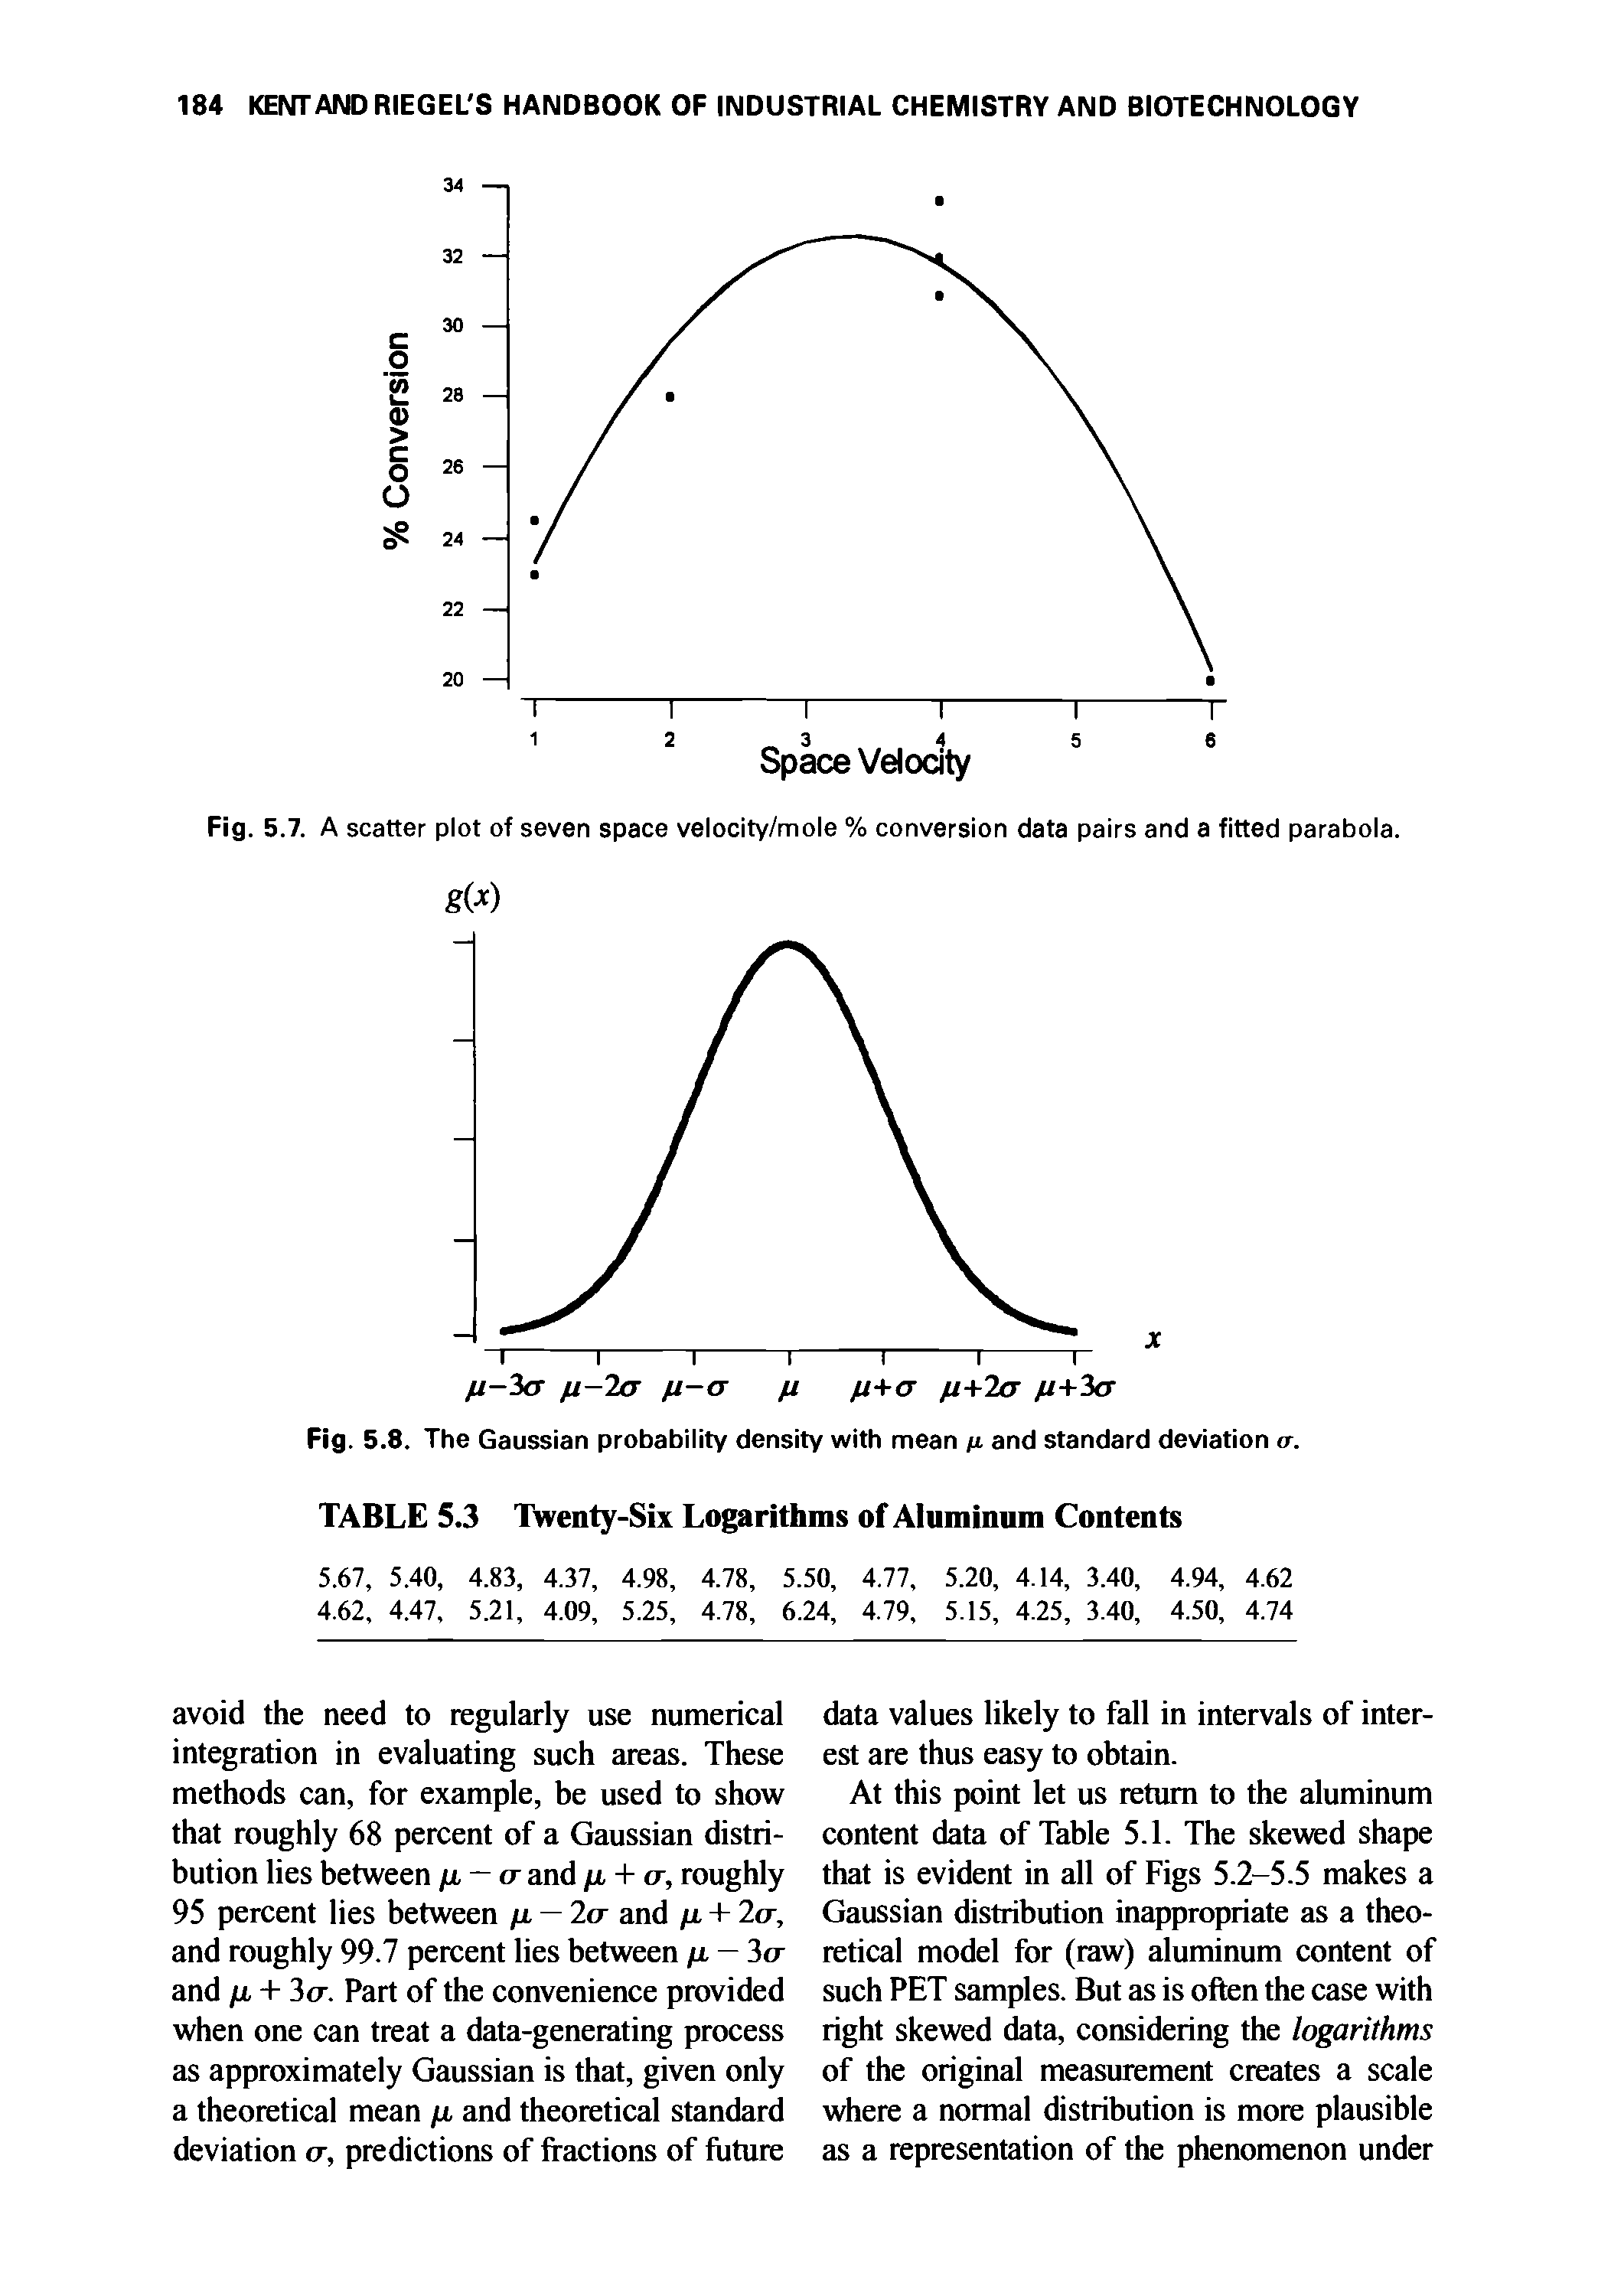 Fig. 5.8. The Gaussian probability density with mean ju. and standard deviation a.